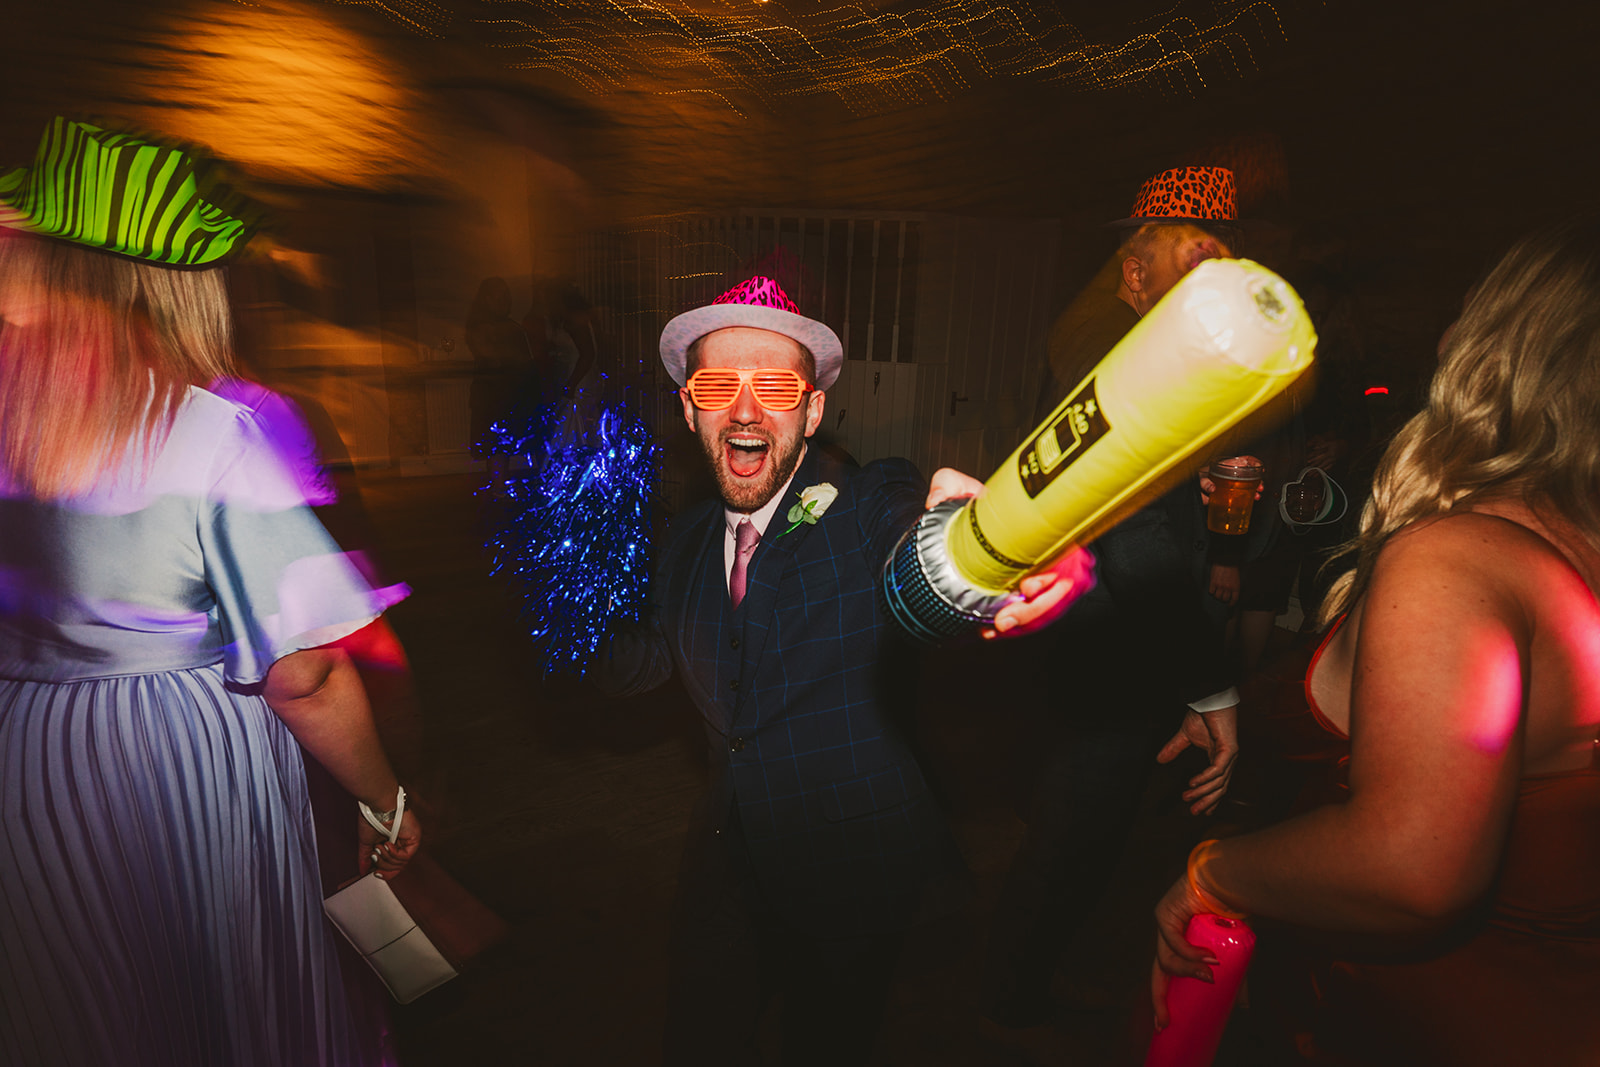 A wedding guest wearing sunglasses and holding a blow up mic on the dance floor at Brympton House